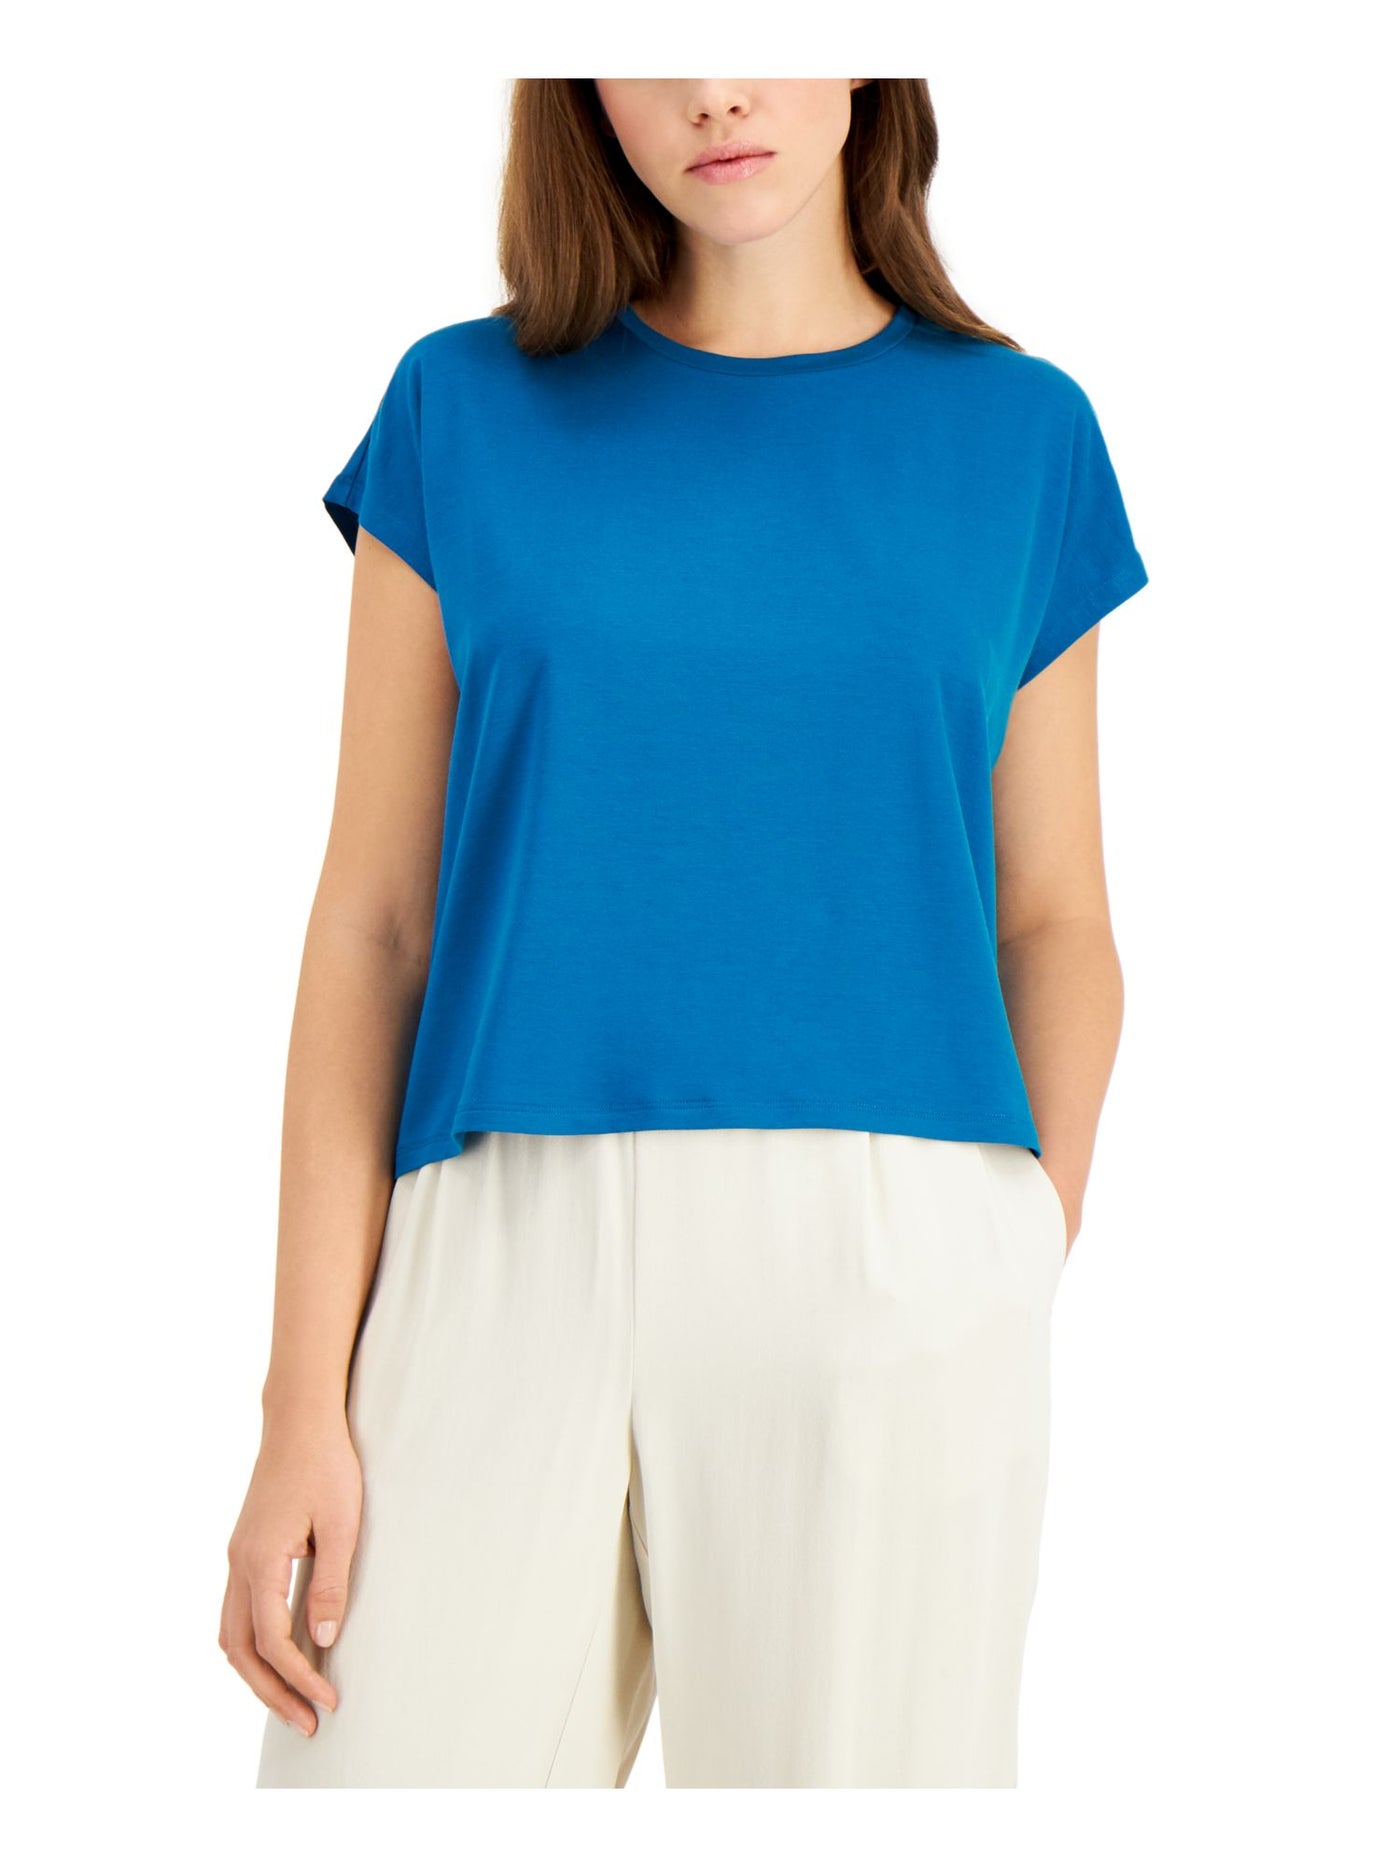 EILEEN FISHER Womens Turquoise Stretch Short Sleeve Crew Neck Top XL